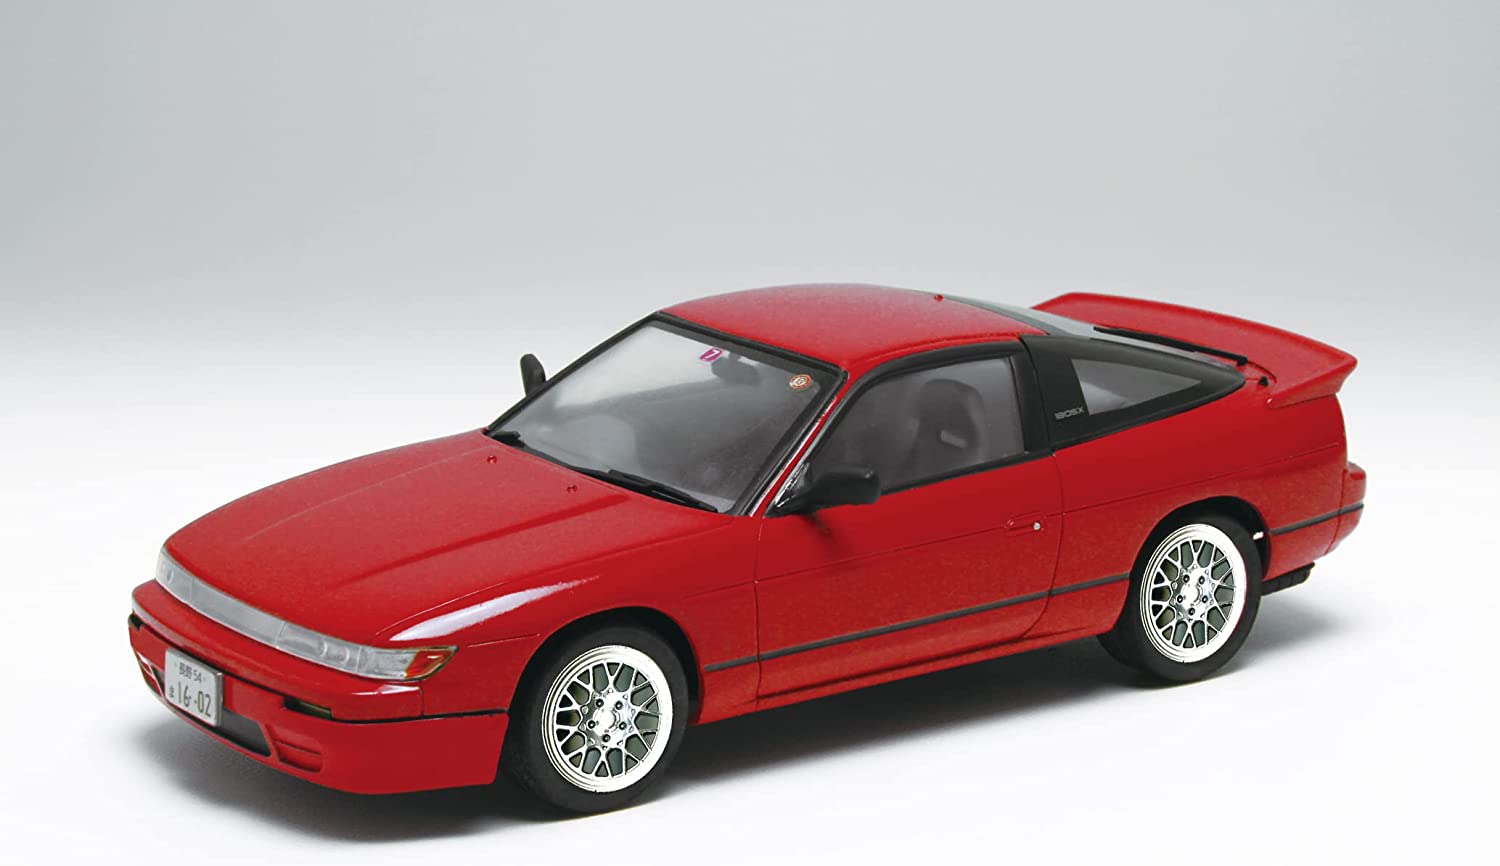 Fujimi Id-96 1/24 Inch up Series Nissan Sileighty S13 Rs13 for sale online